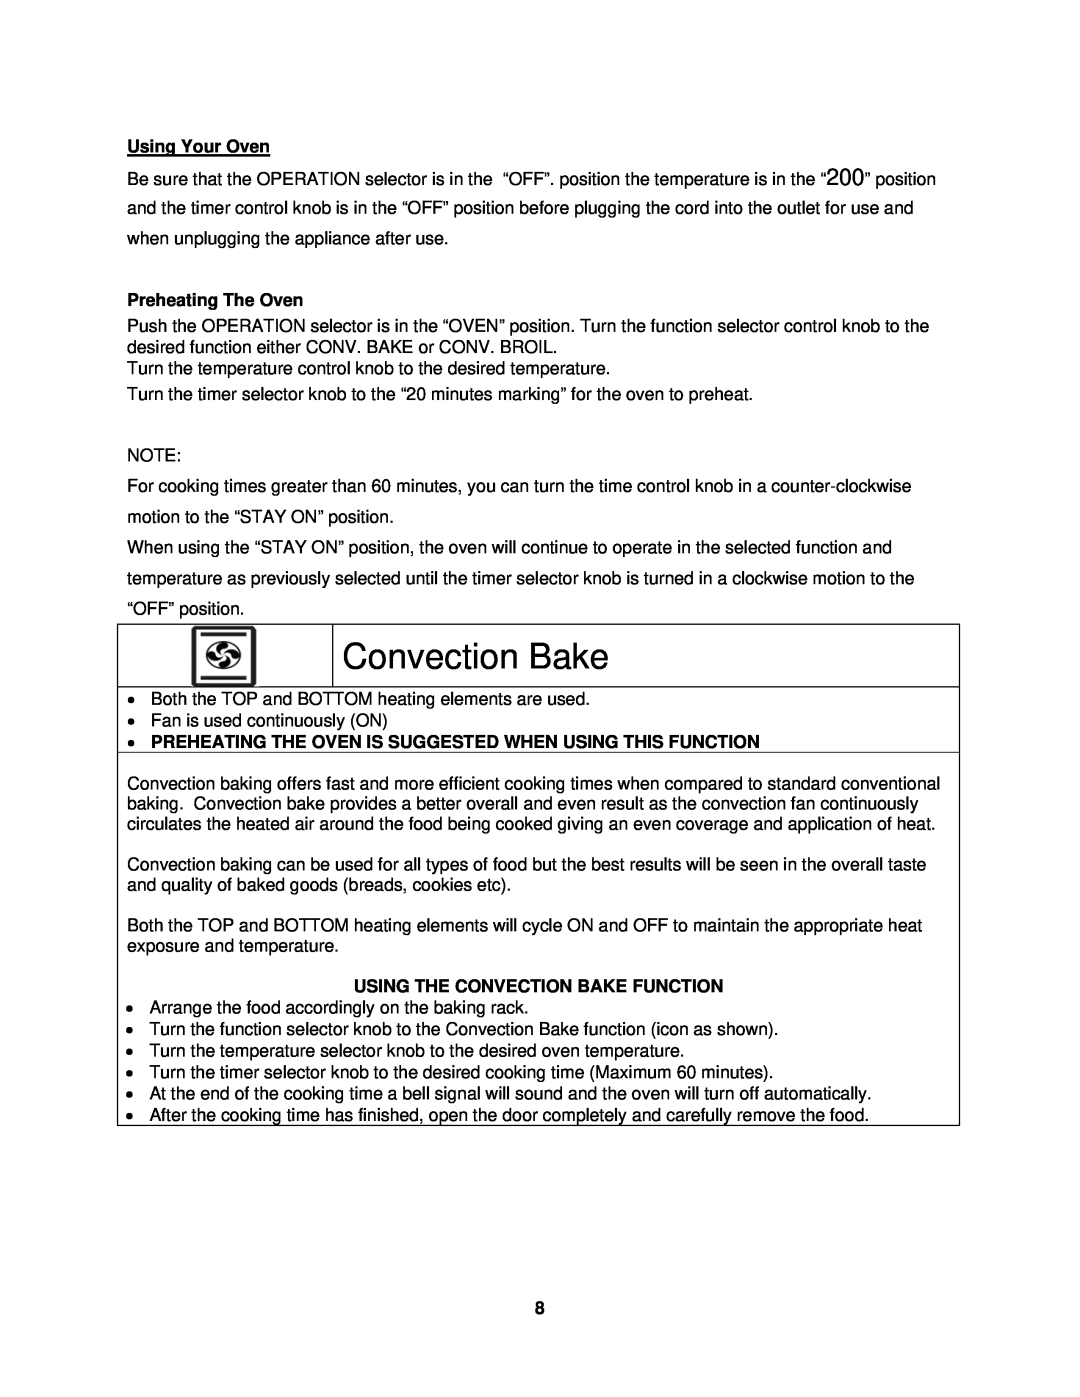 Avanti MKB42B instruction manual Using Your Oven, Preheating The Oven, Using The Convection Bake Function 